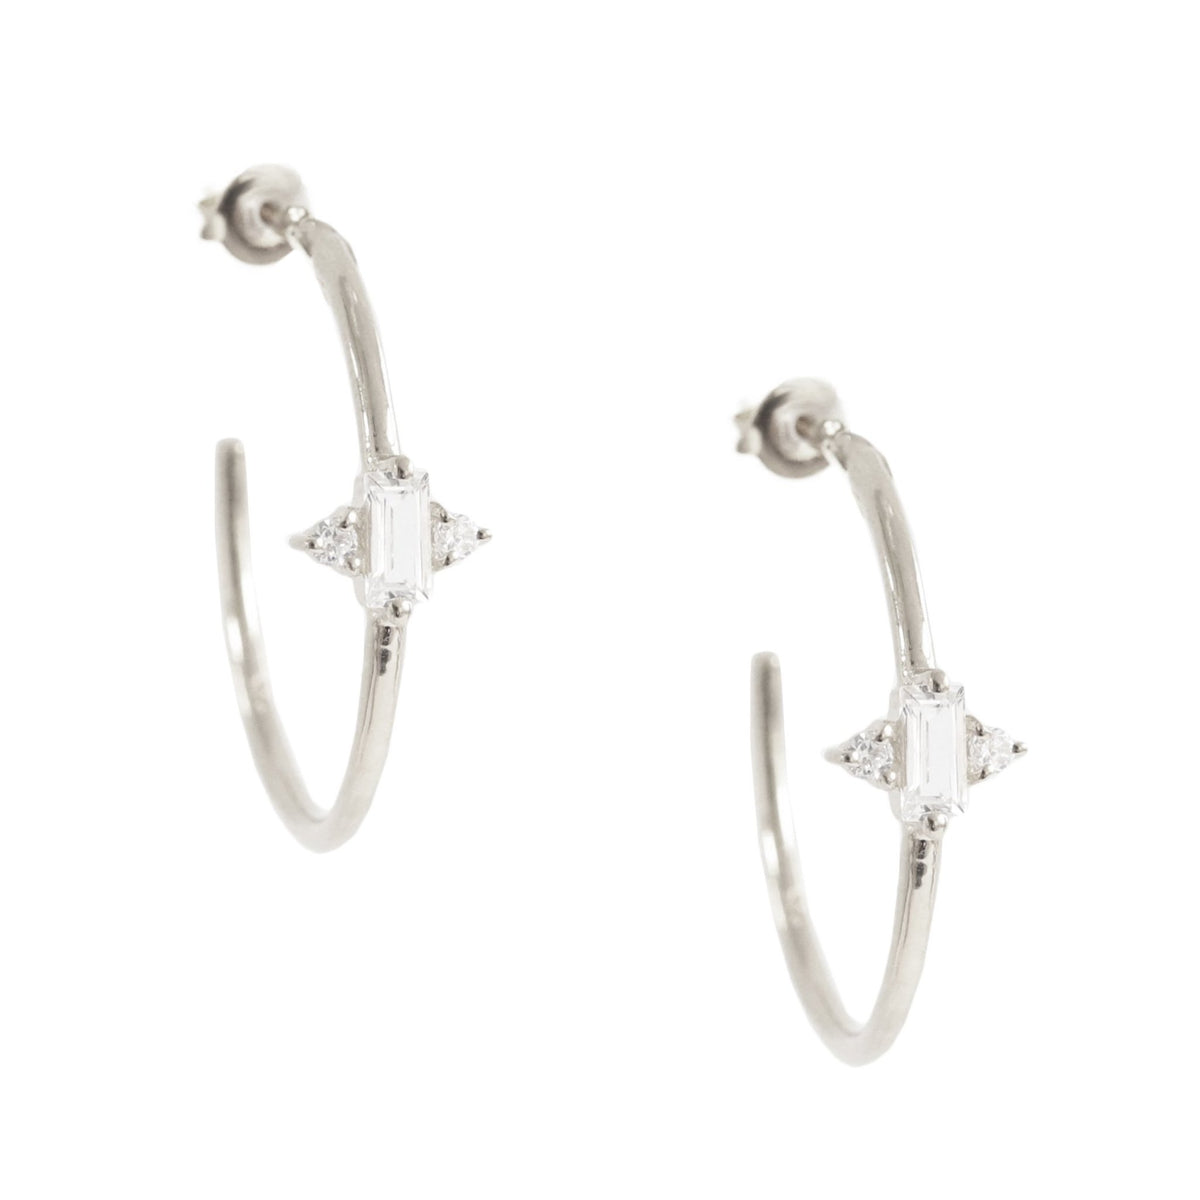 Loyal Prism Hoops - White Topaz, Cubic Zirconia &amp; Silver - SO PRETTY CARA COTTER